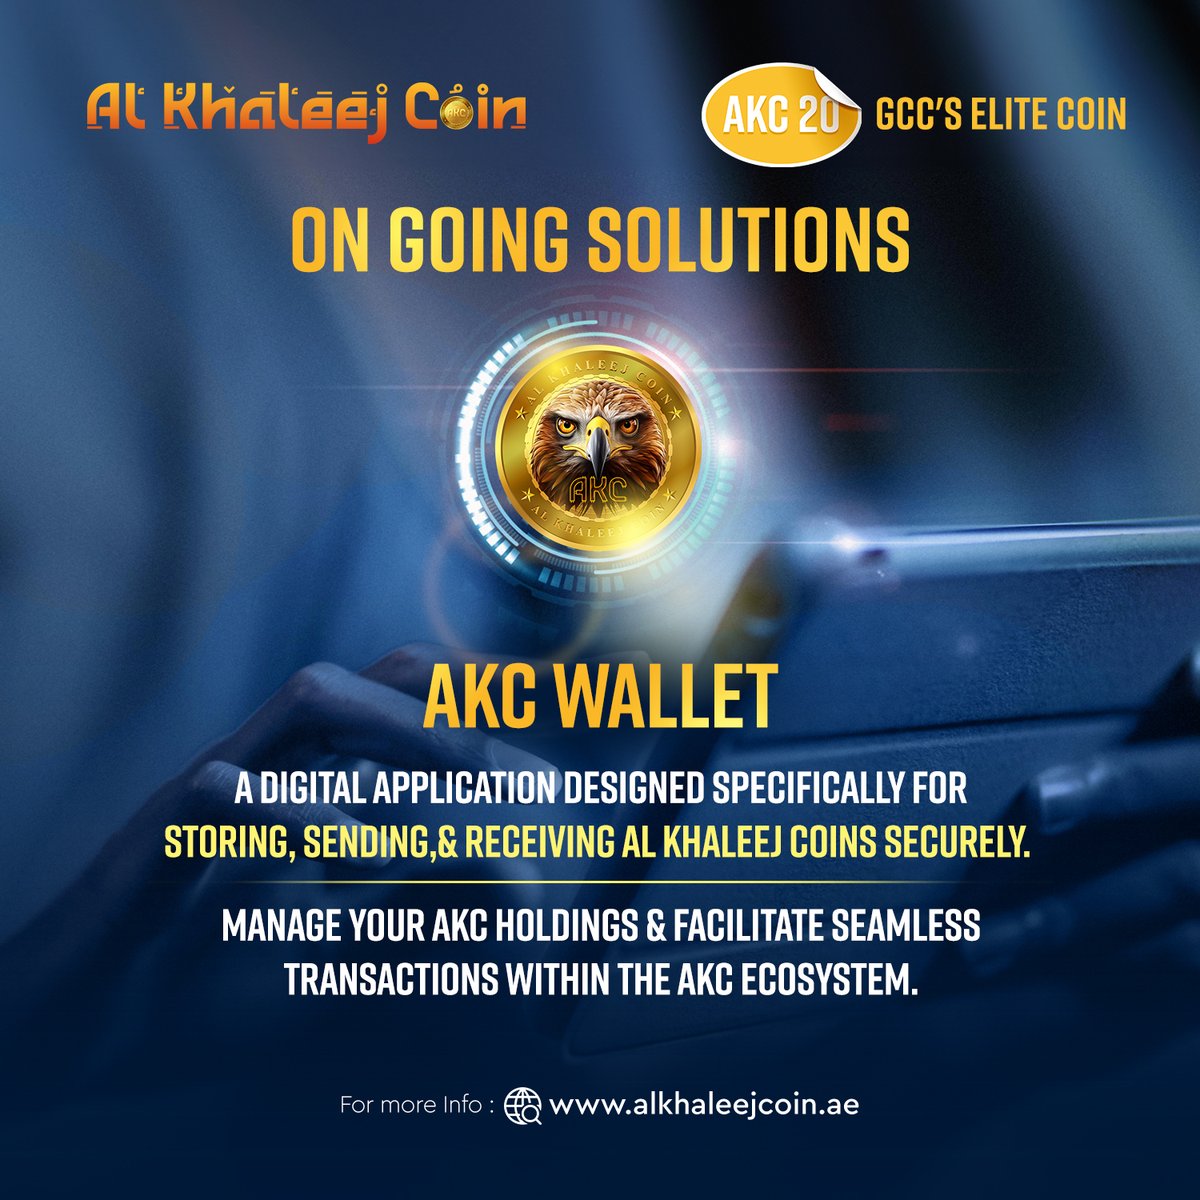 😎🌟Discover our ongoing solutions for seamless crypto management! 🔥Introducing the AKC Wallet, your secure hub for storing, sending, and receiving Al Khaleej Coins. #CryptoSolutions #AKCWallet #akc #alkhaleejcoin #elitecoin #gcccoin #cryptocoin #wallet